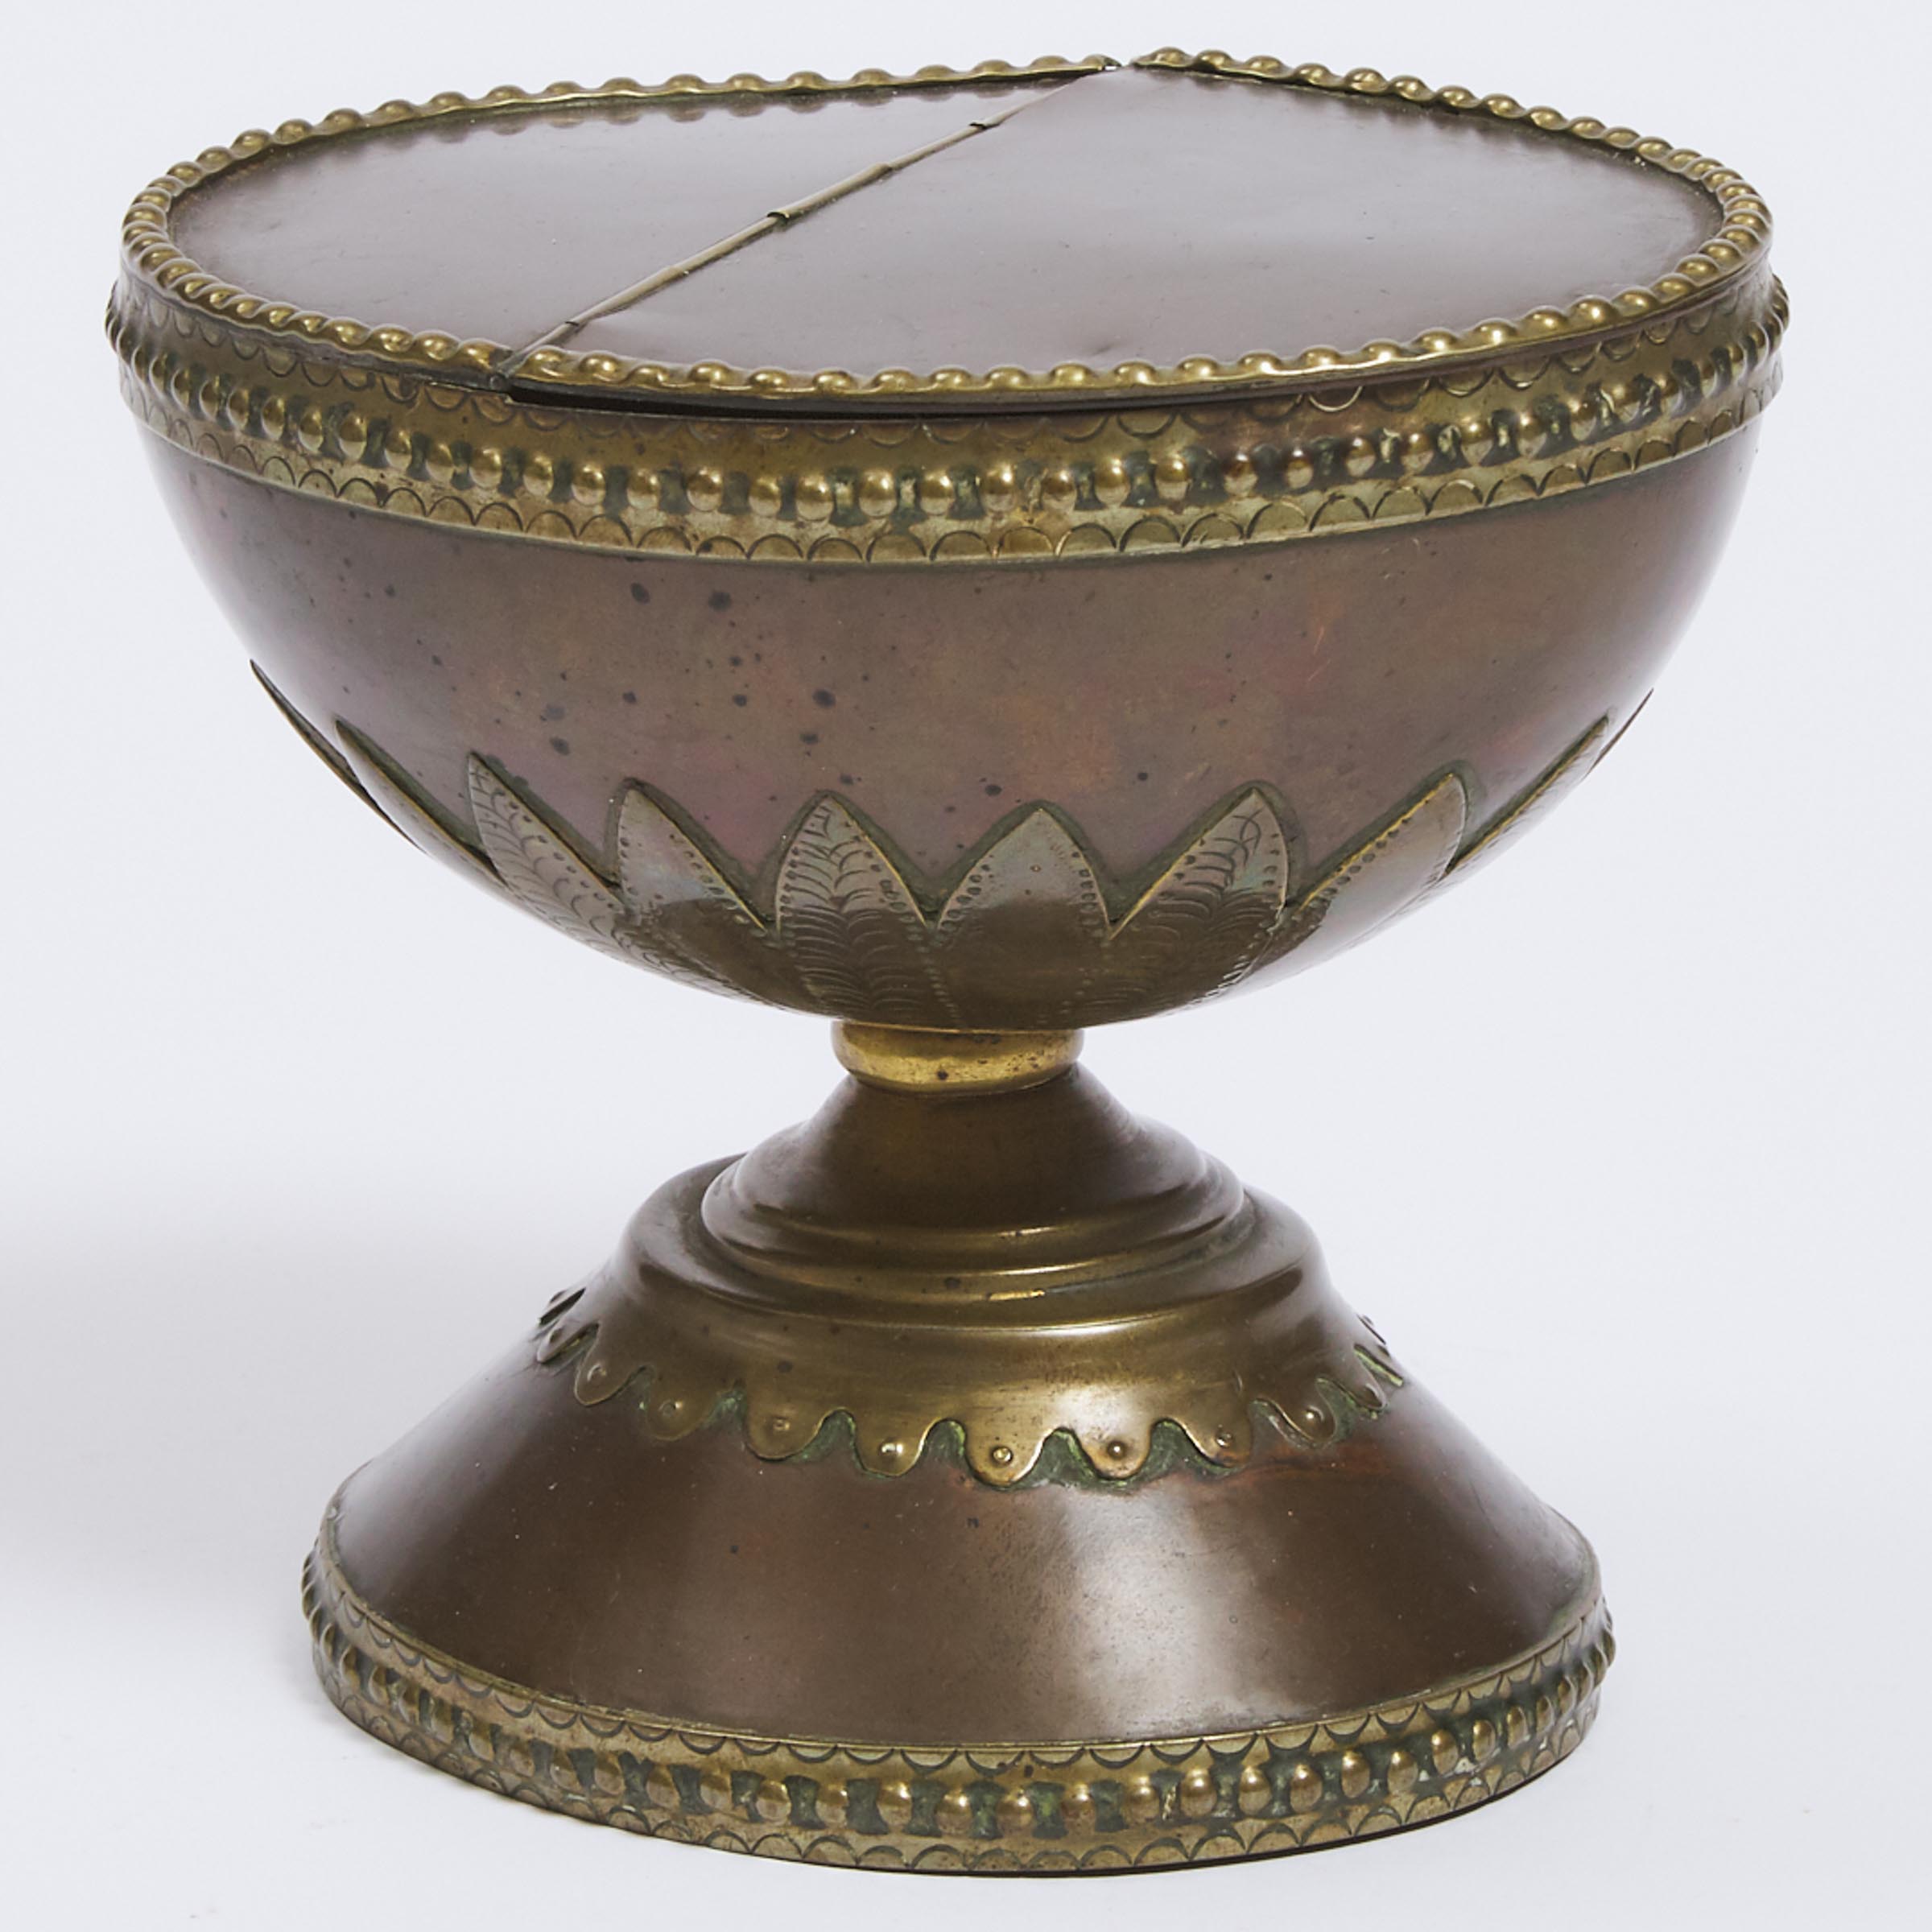 English Copper and Brass Tobacco Boat, 18th/early 19th century